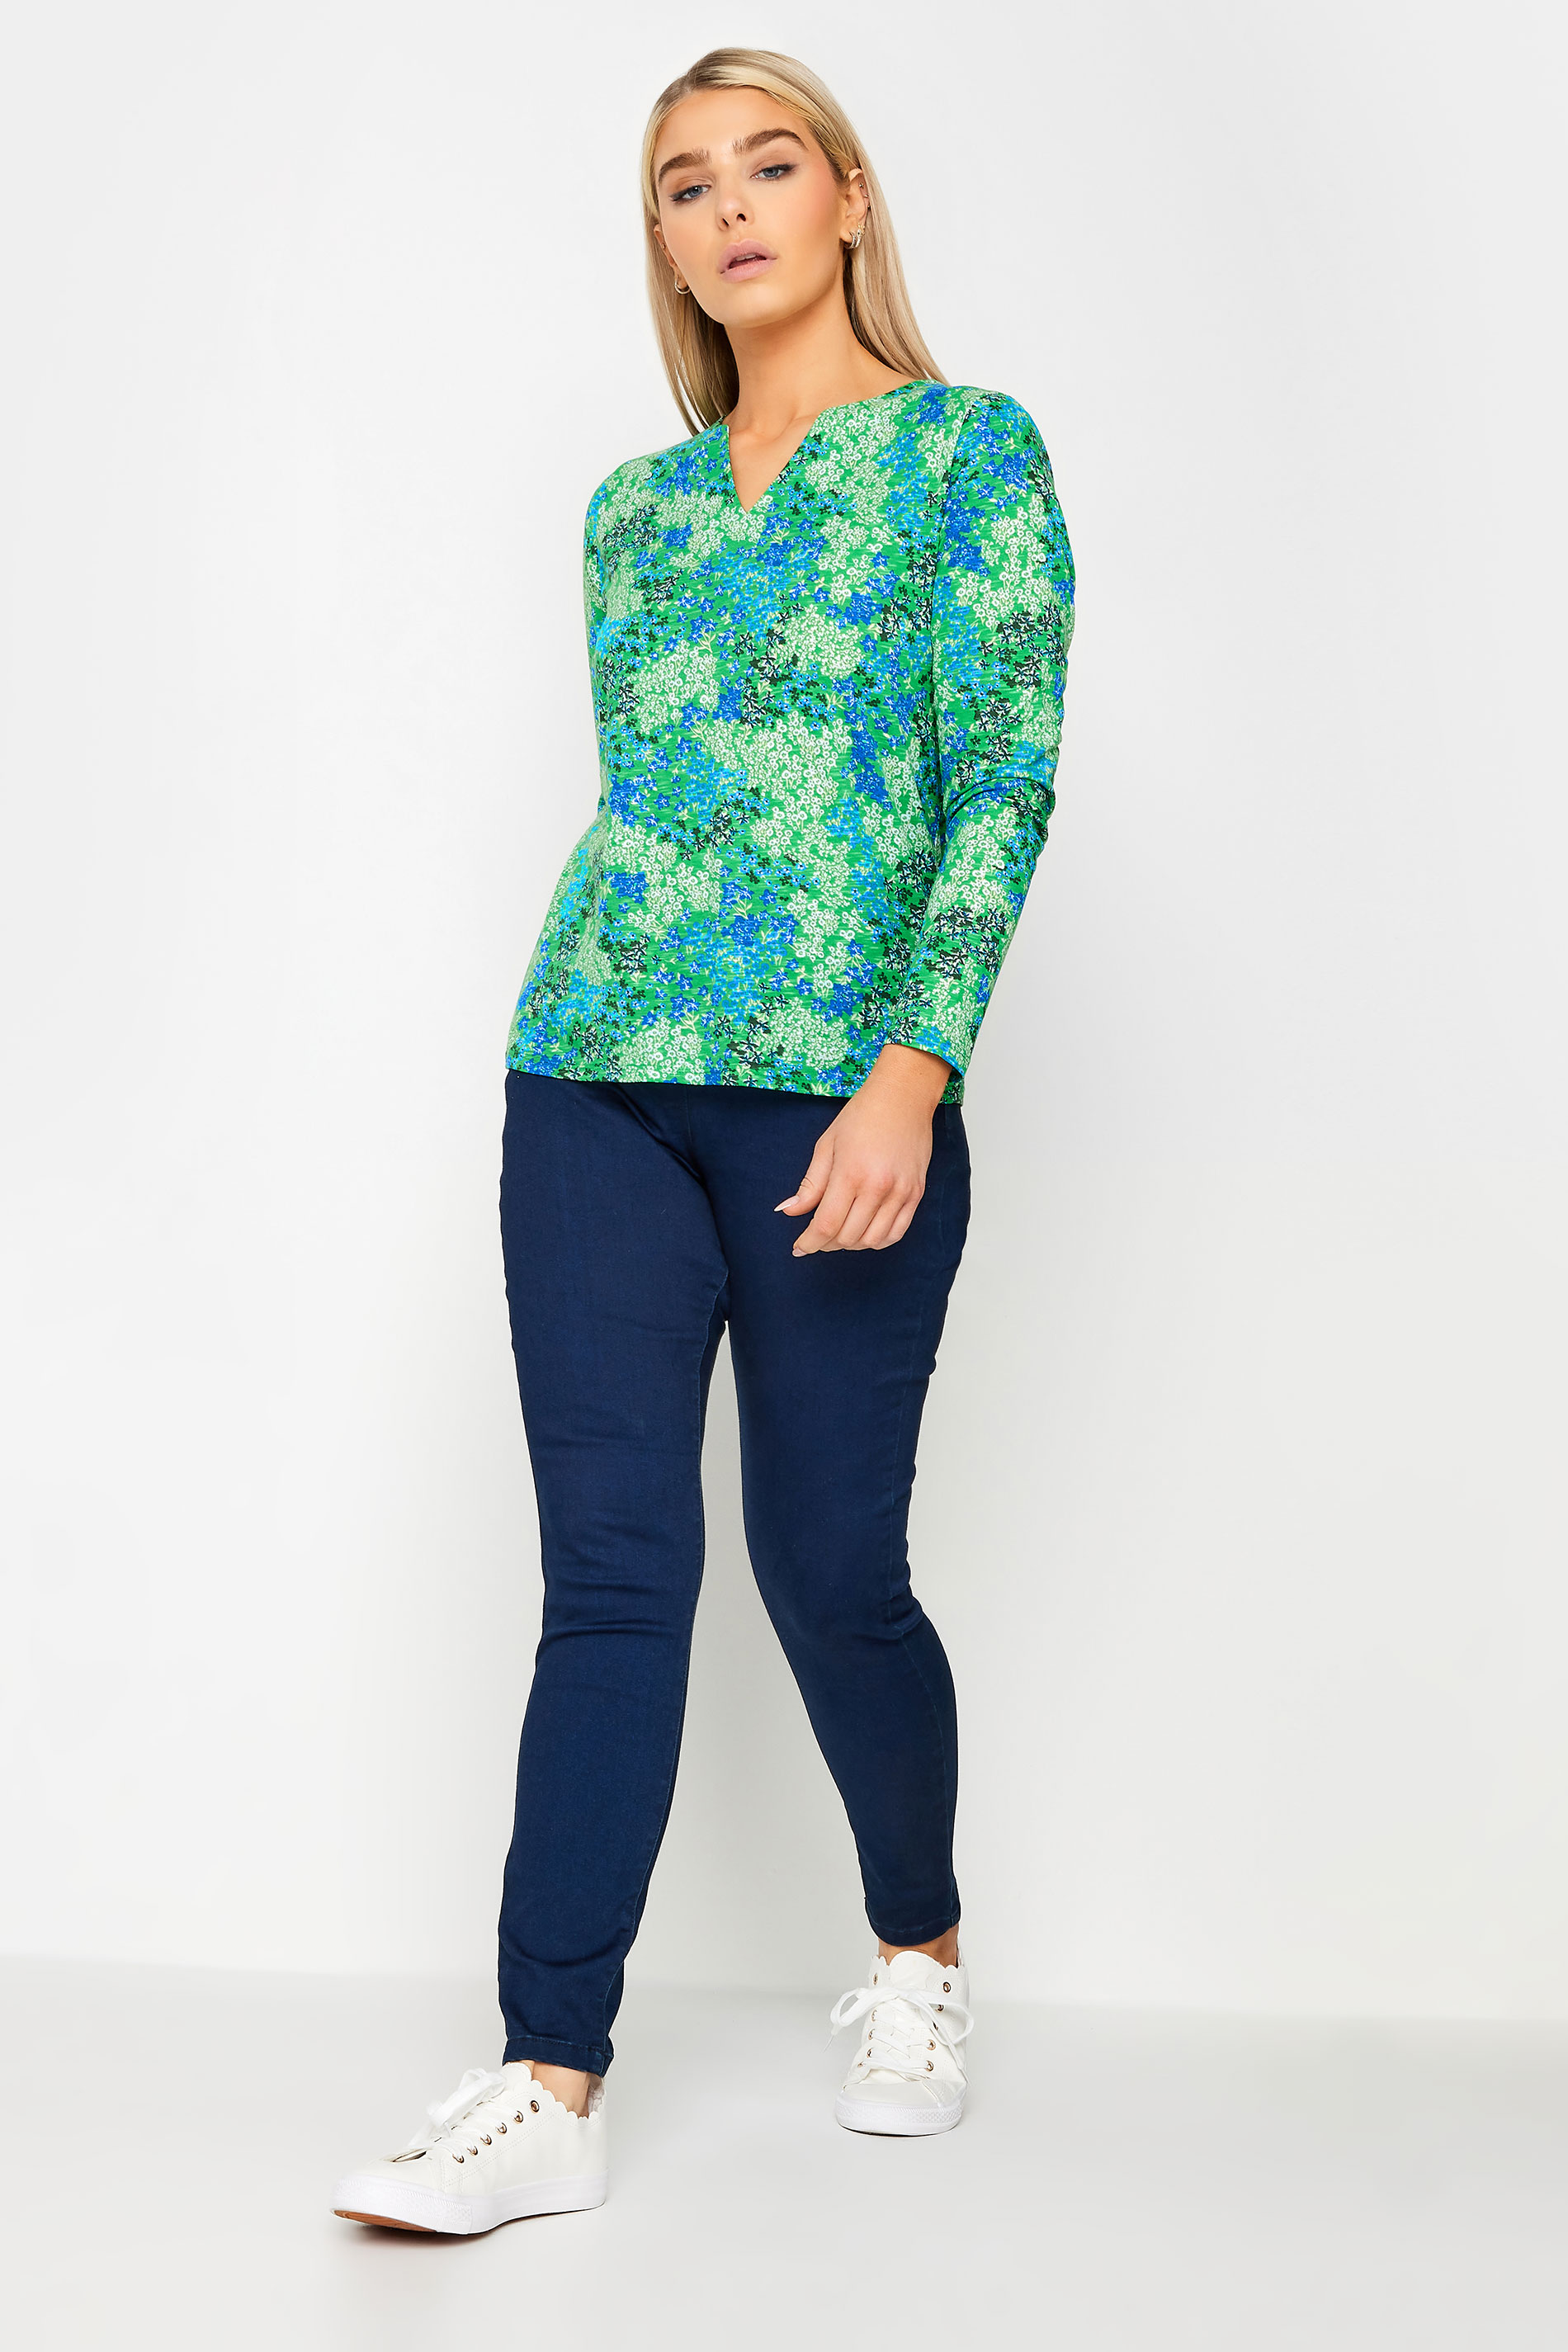 M&Co Green Ditsy Floral Notch Neck Long Sleeve Top | M&Co 2